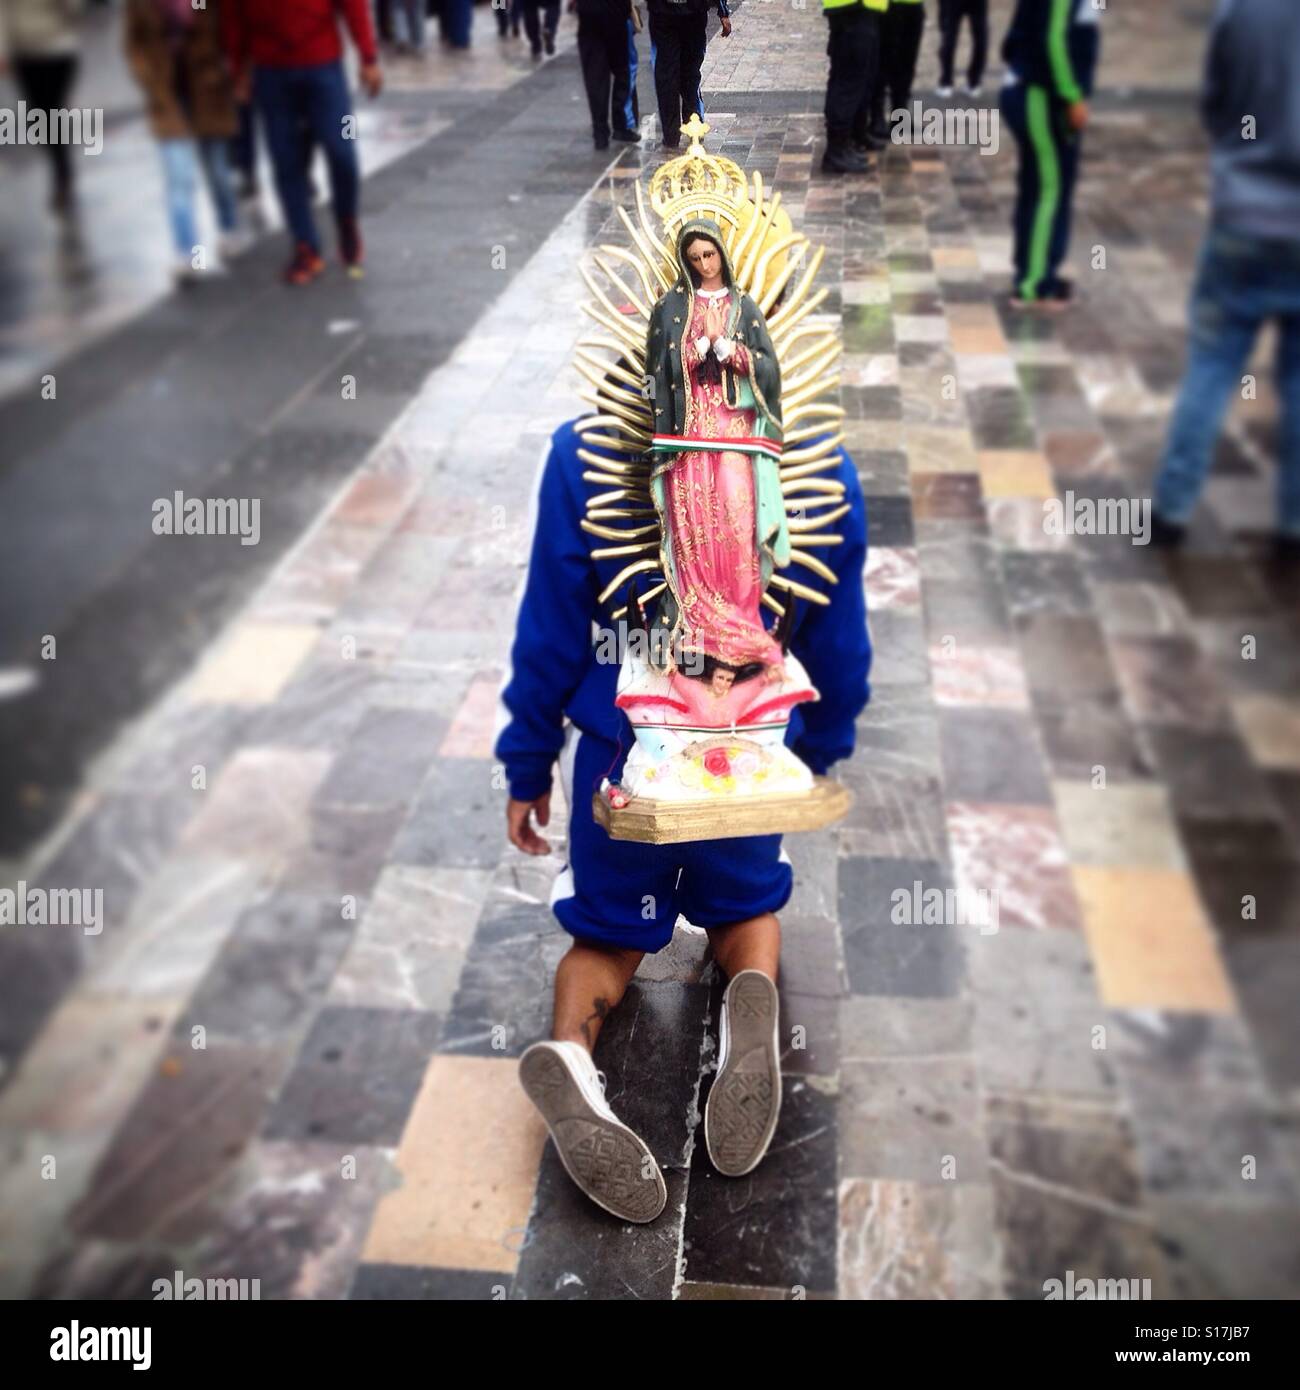 A man enters walks on his knees during the anual pilgrimage to Our Lady of Guadalupe, in Mexico City, Mexico Stock Photo